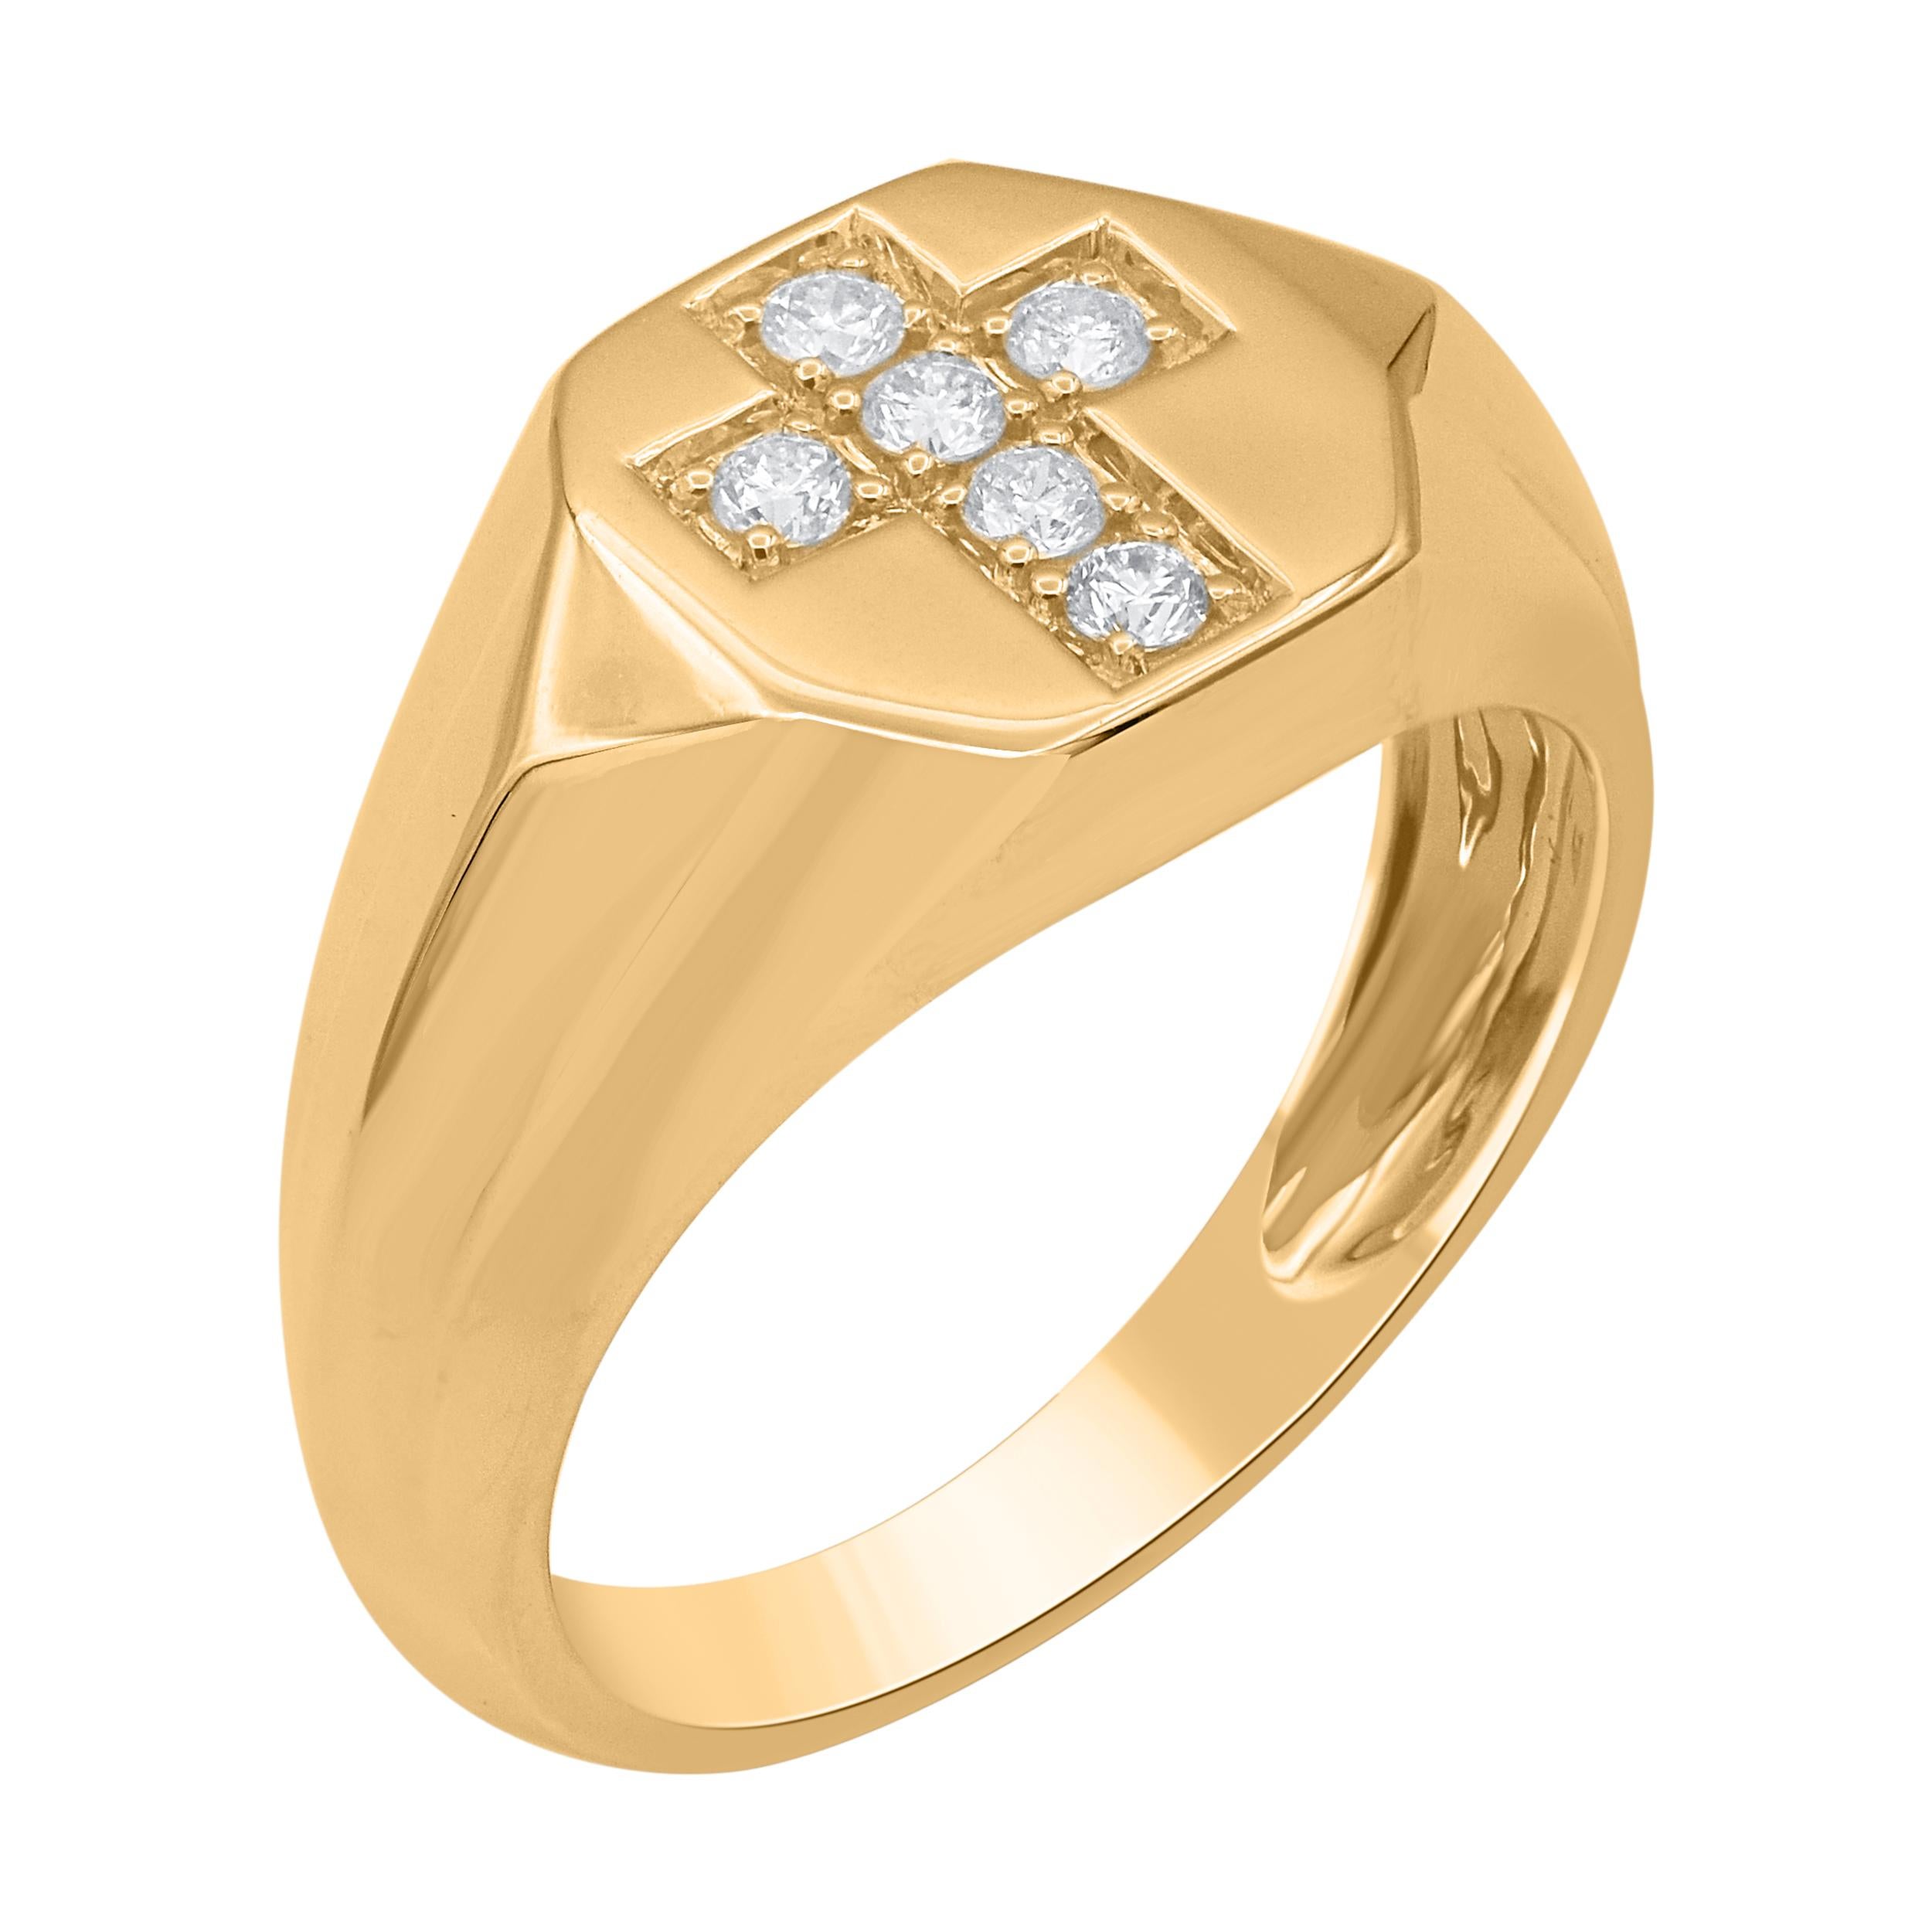 This diamond cross ring is a bold statement of faith. These cross ring are studded with 6 brilliant cut 0.25ct natural diamonds in 18KT yellow gold. The white diamonds are graded as H-I color and I-2 clarity.